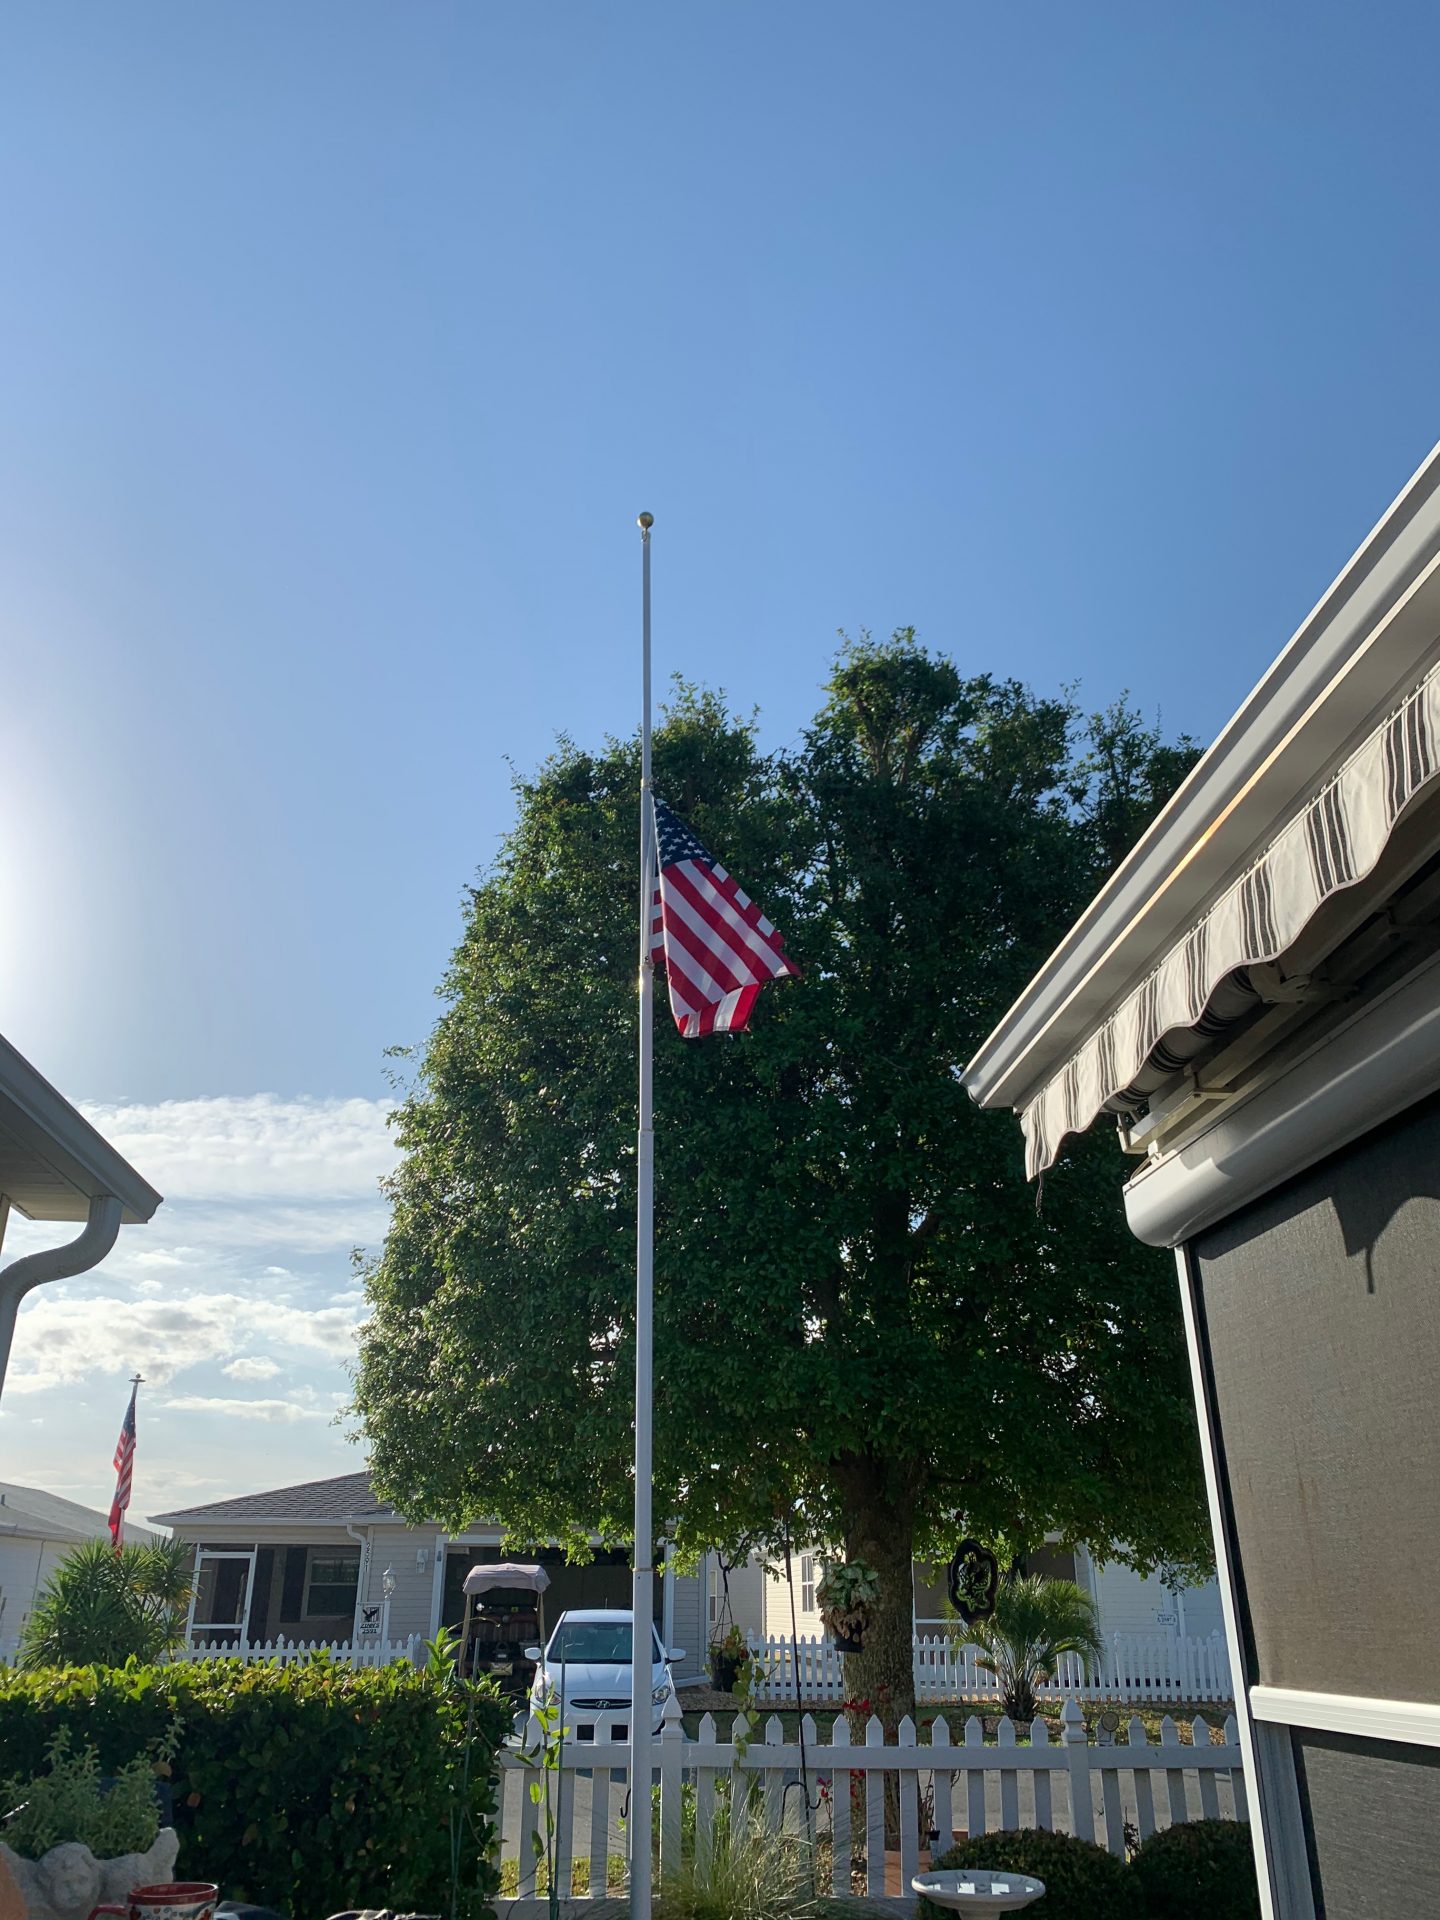 Pops flag at half-staff in honor of our service hero.